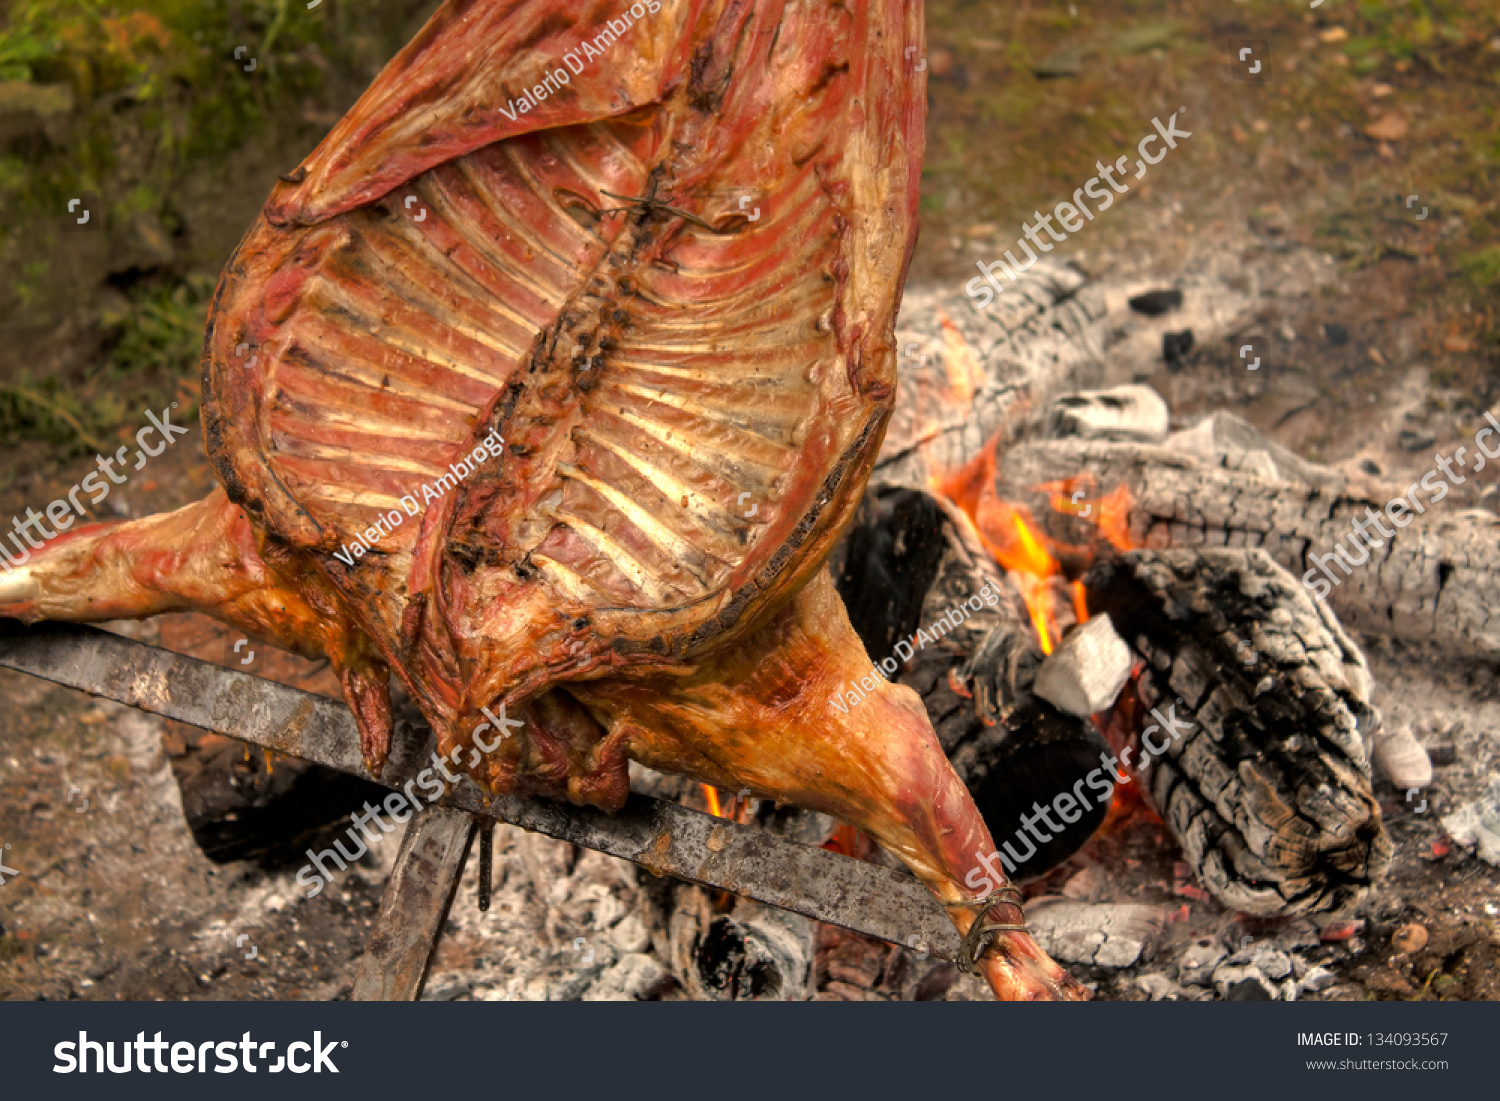 Woman Spit Roasted Over Fire